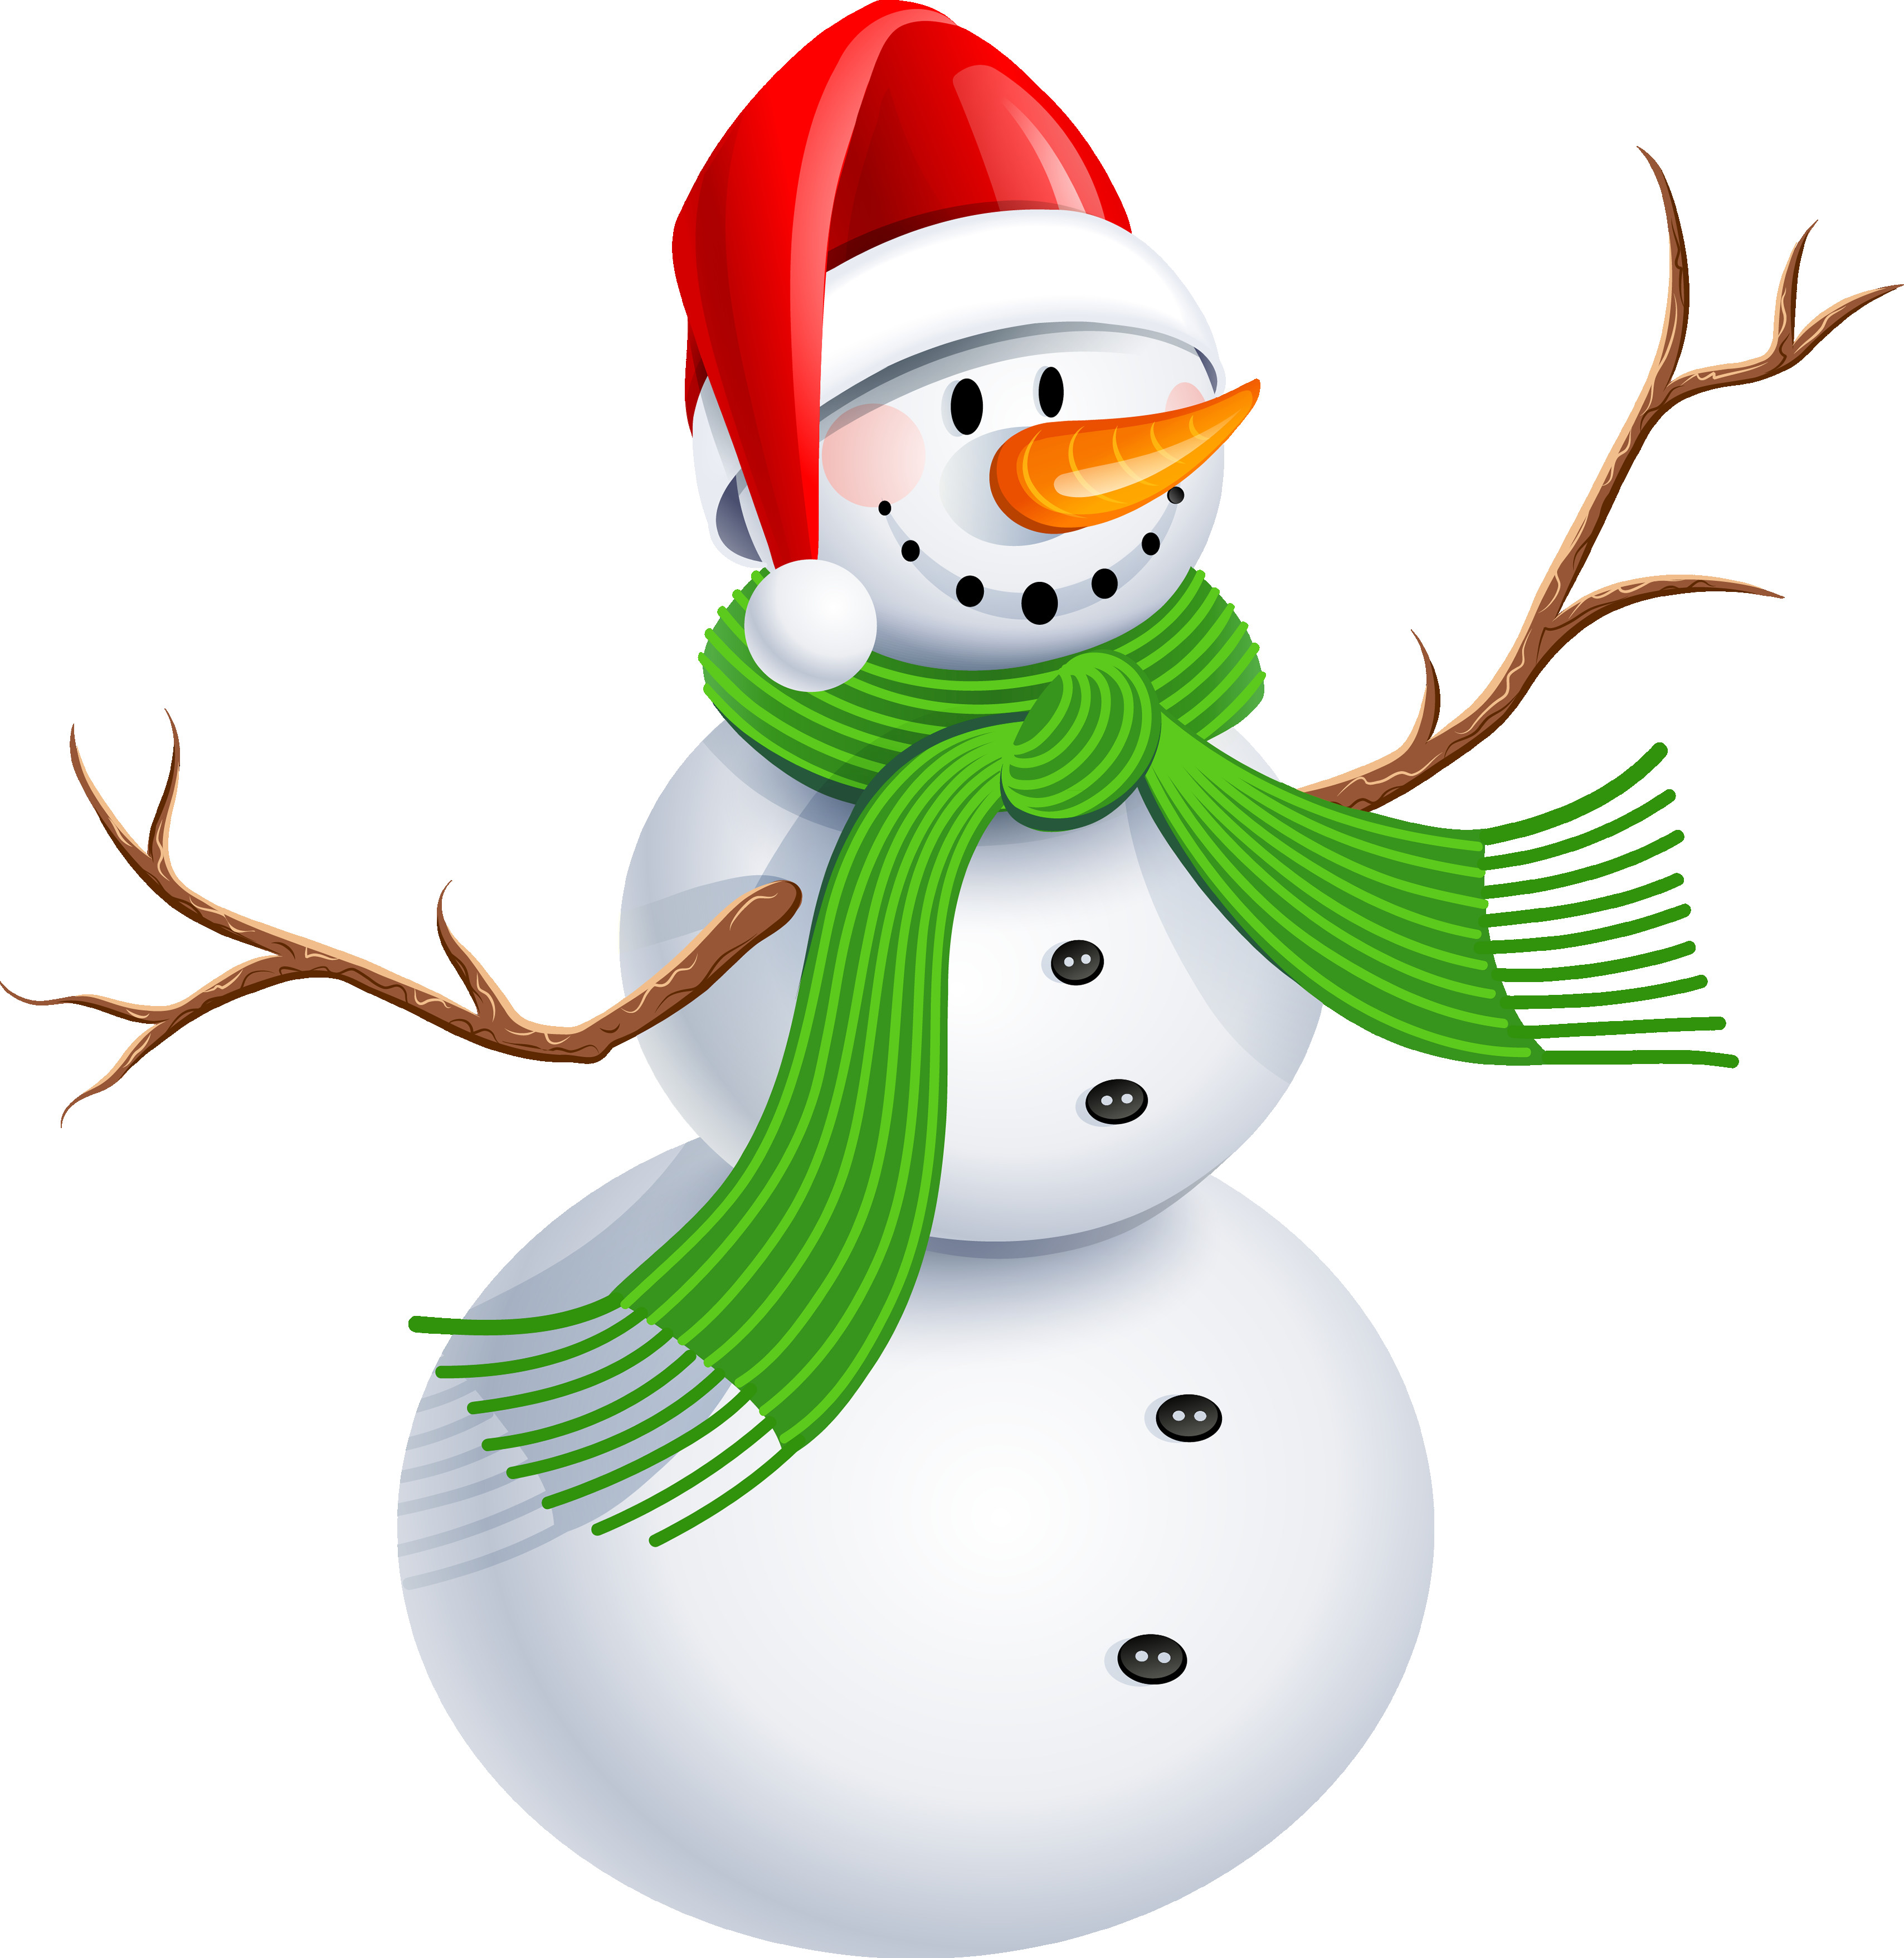 Snowman Clipart For Kids at GetDrawings.com.